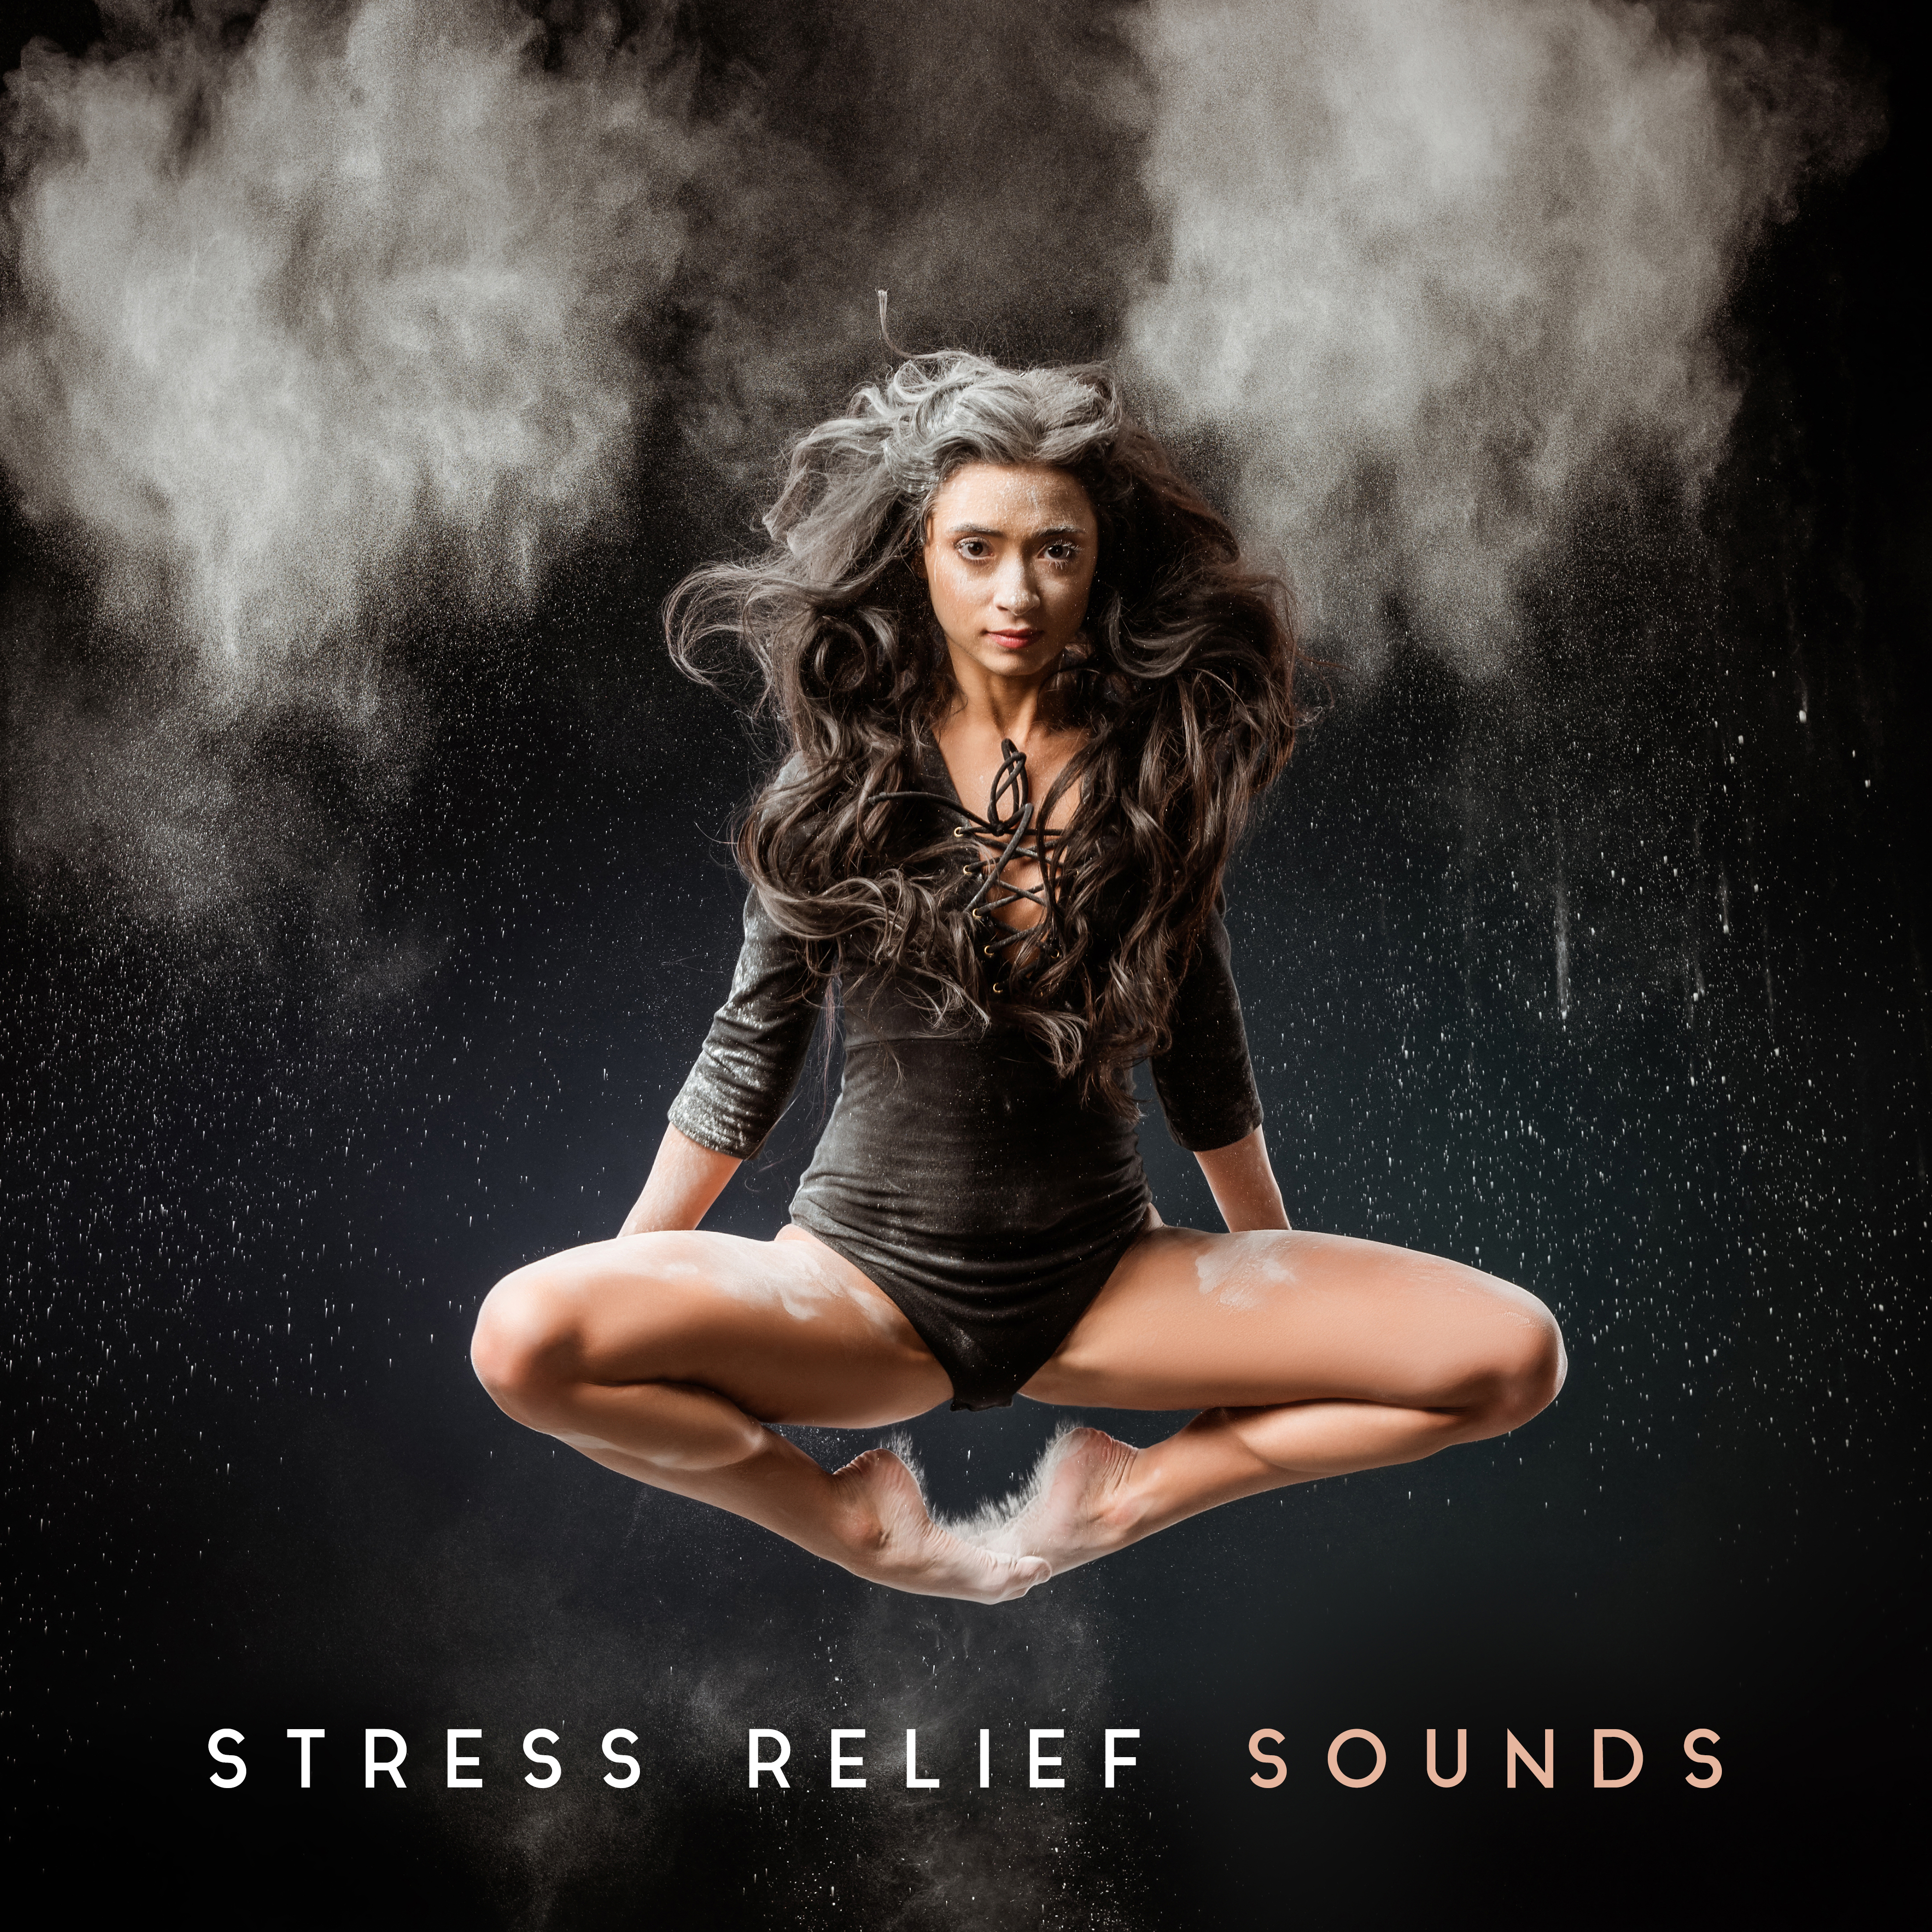 Stress Relief Sounds  Music for Deep Relaxation, Healing Melodies for Meditation, Yoga, Spa, Deeper Sleep